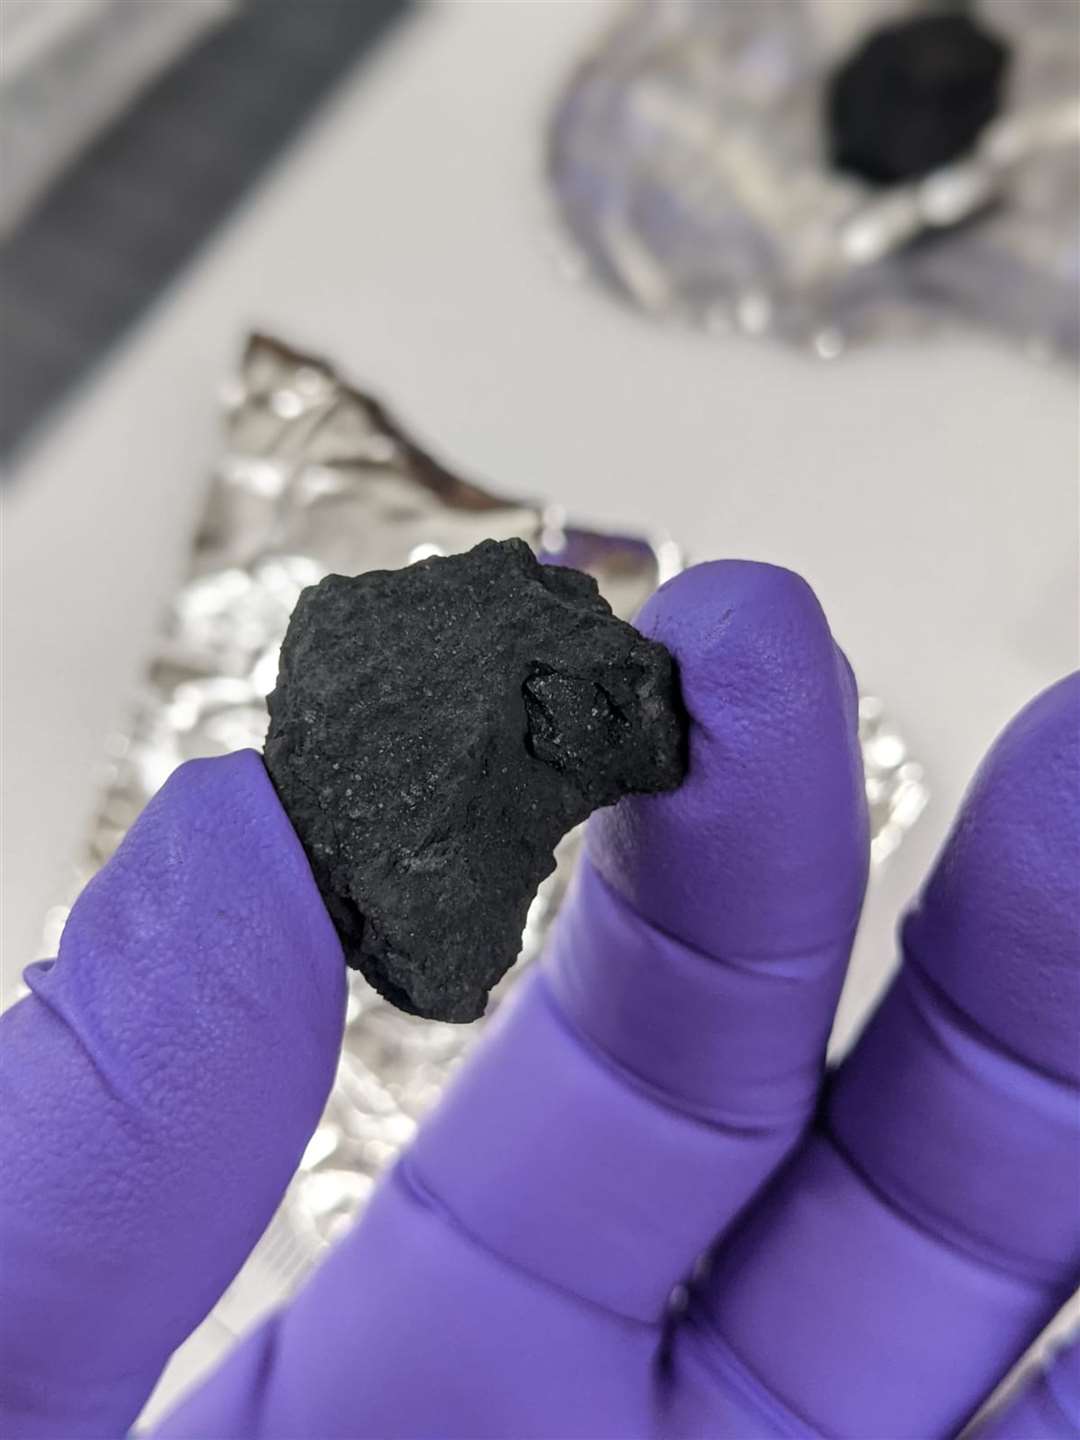 Fragment from a meteorite, likely to be known as the Winchcombe meteorite, which is an extremely rare type called a carbonaceous chondrite (Trustees of the Natural History Museum/PA)